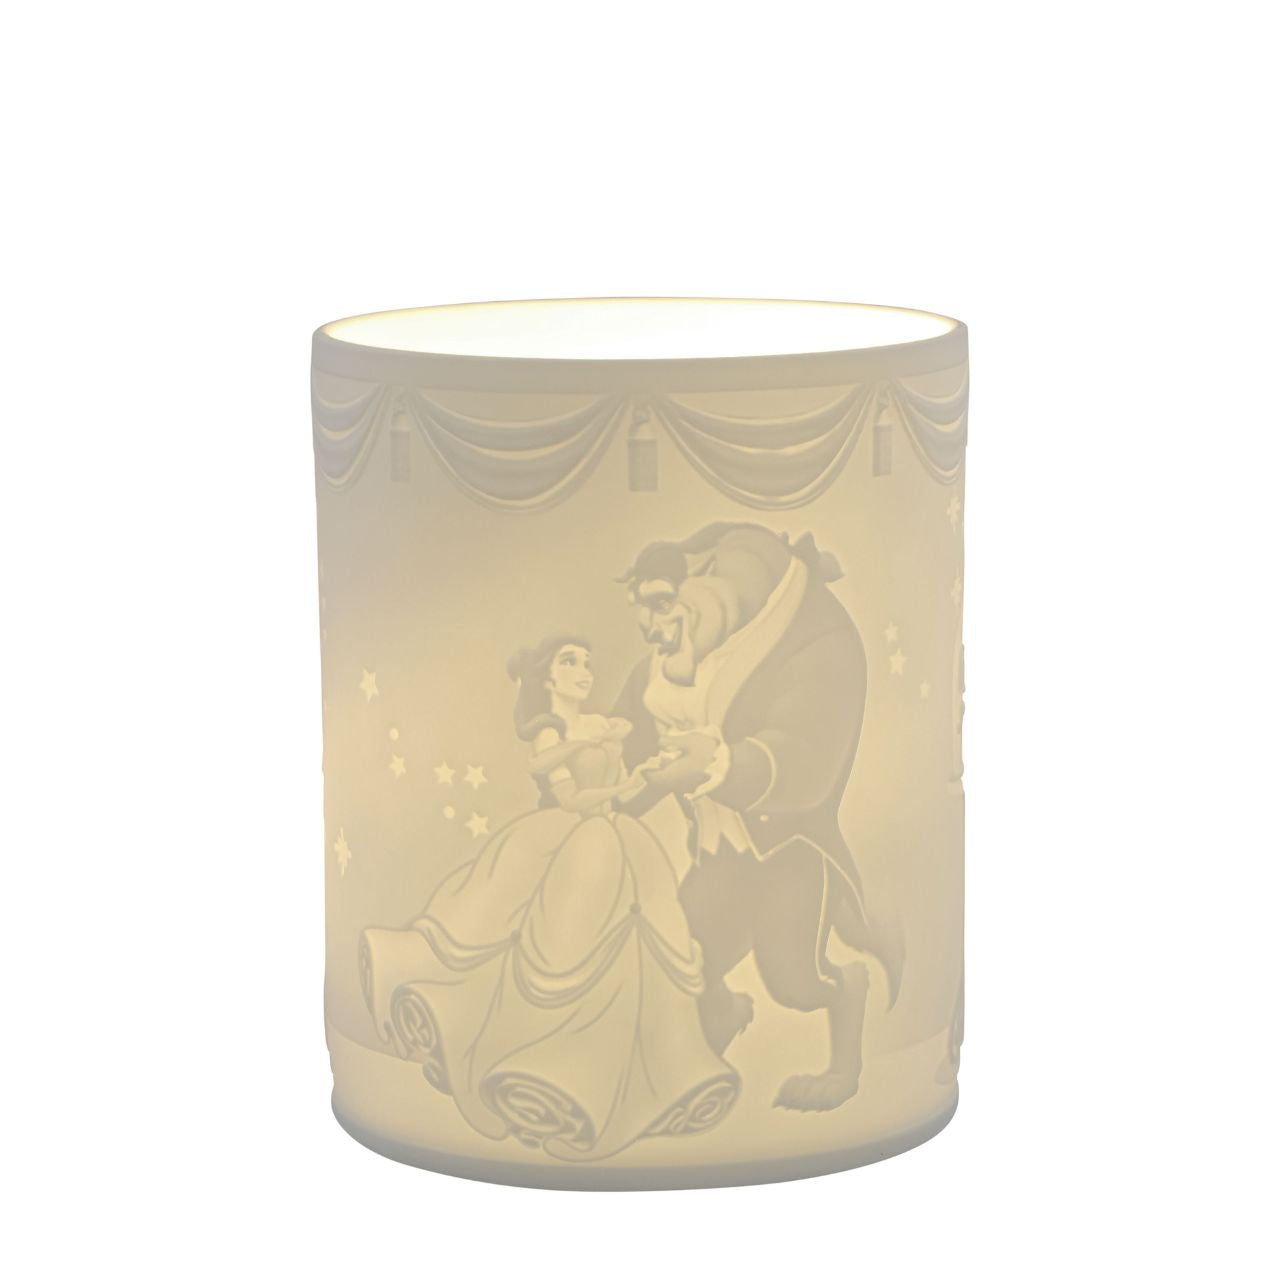 Disney Beauty Within Beauty and The Beast Tea Light Holder  Watch as Beauty and The Beast flicker around your room when you light the LED candle. The Belle and her Prince along with the enchanted rose are etched into the thin translucent porcelain which will radiate a warm light when lit at night. Perfect Disney addition to any home décor.